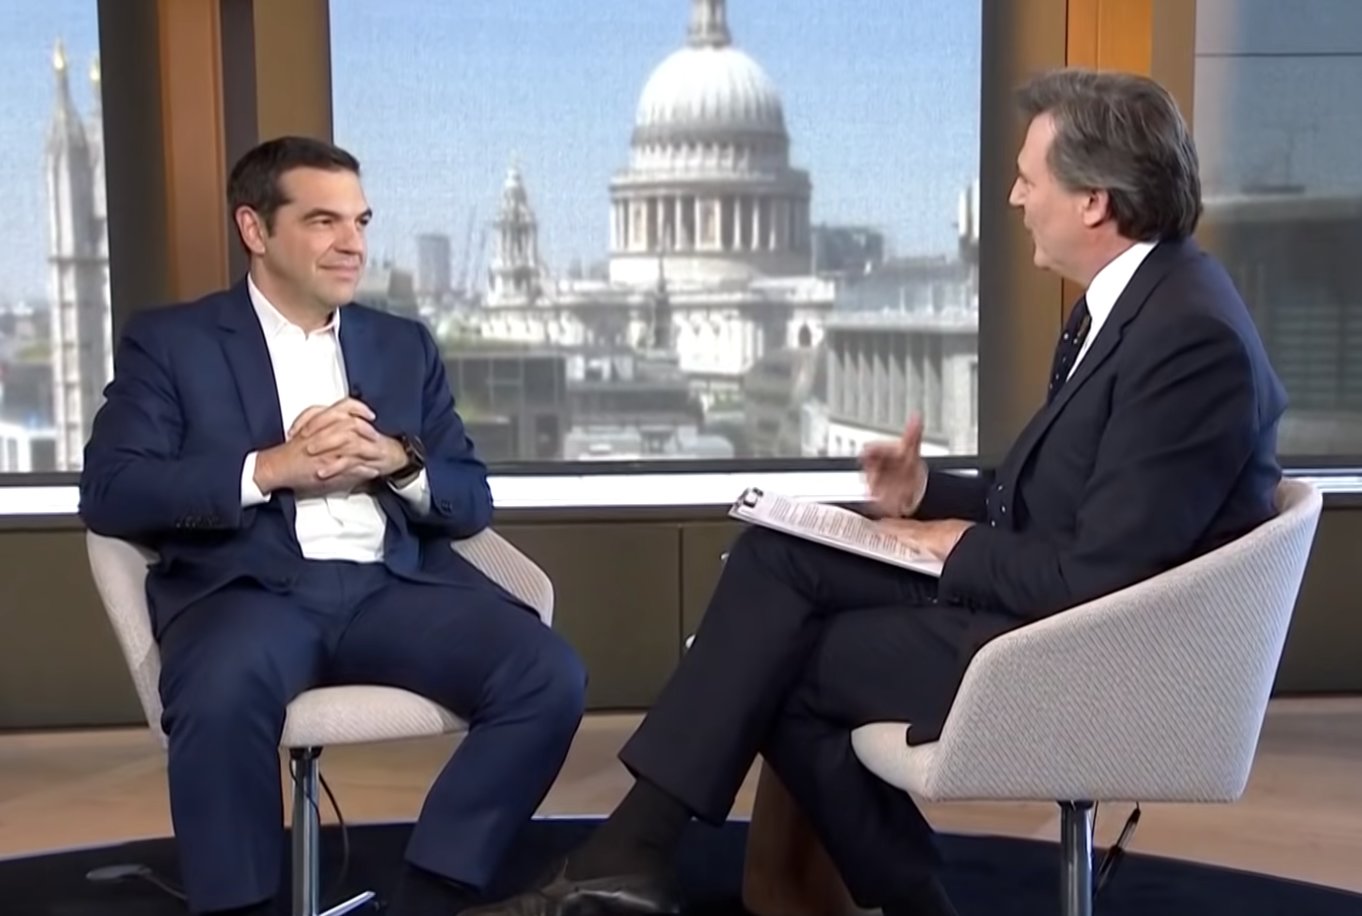 Tsipras Says Greece Won’t Go Back to Old Spending Ways